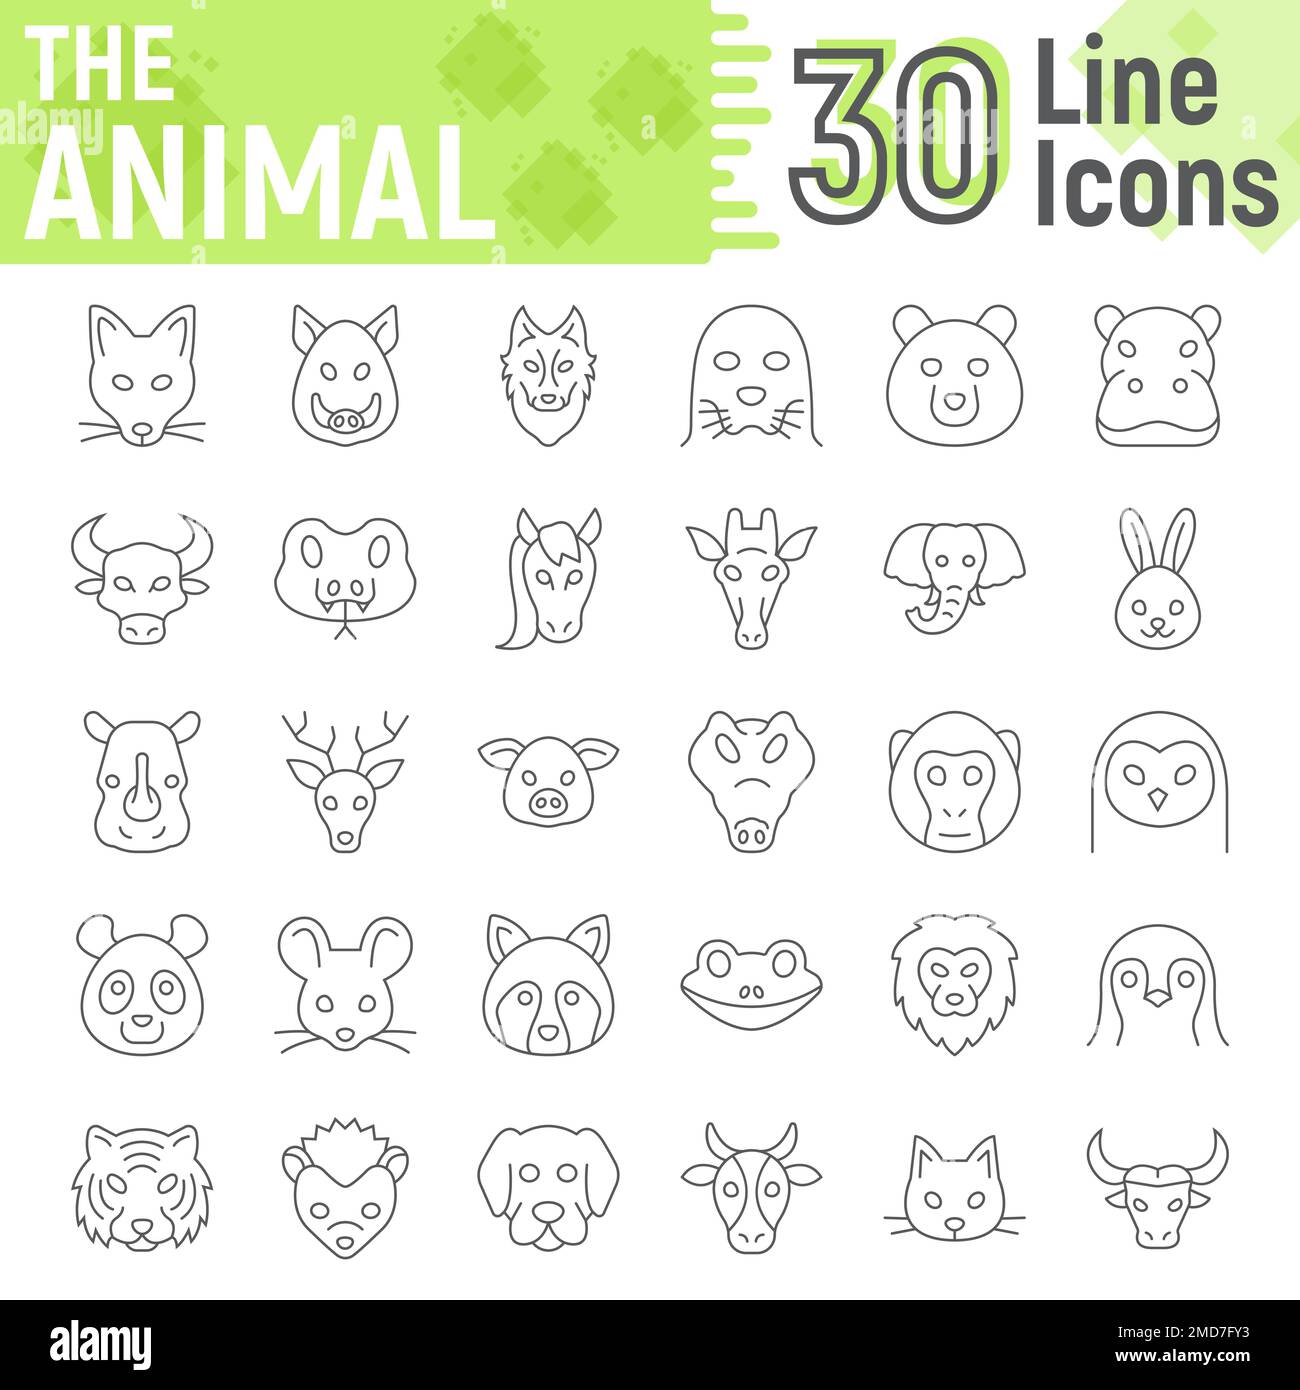 Animal thin line icon set, beast symbols collection, vector sketches, logo illustrations, farm signs linear pictograms package isolated on white background, eps 10. Stock Vector